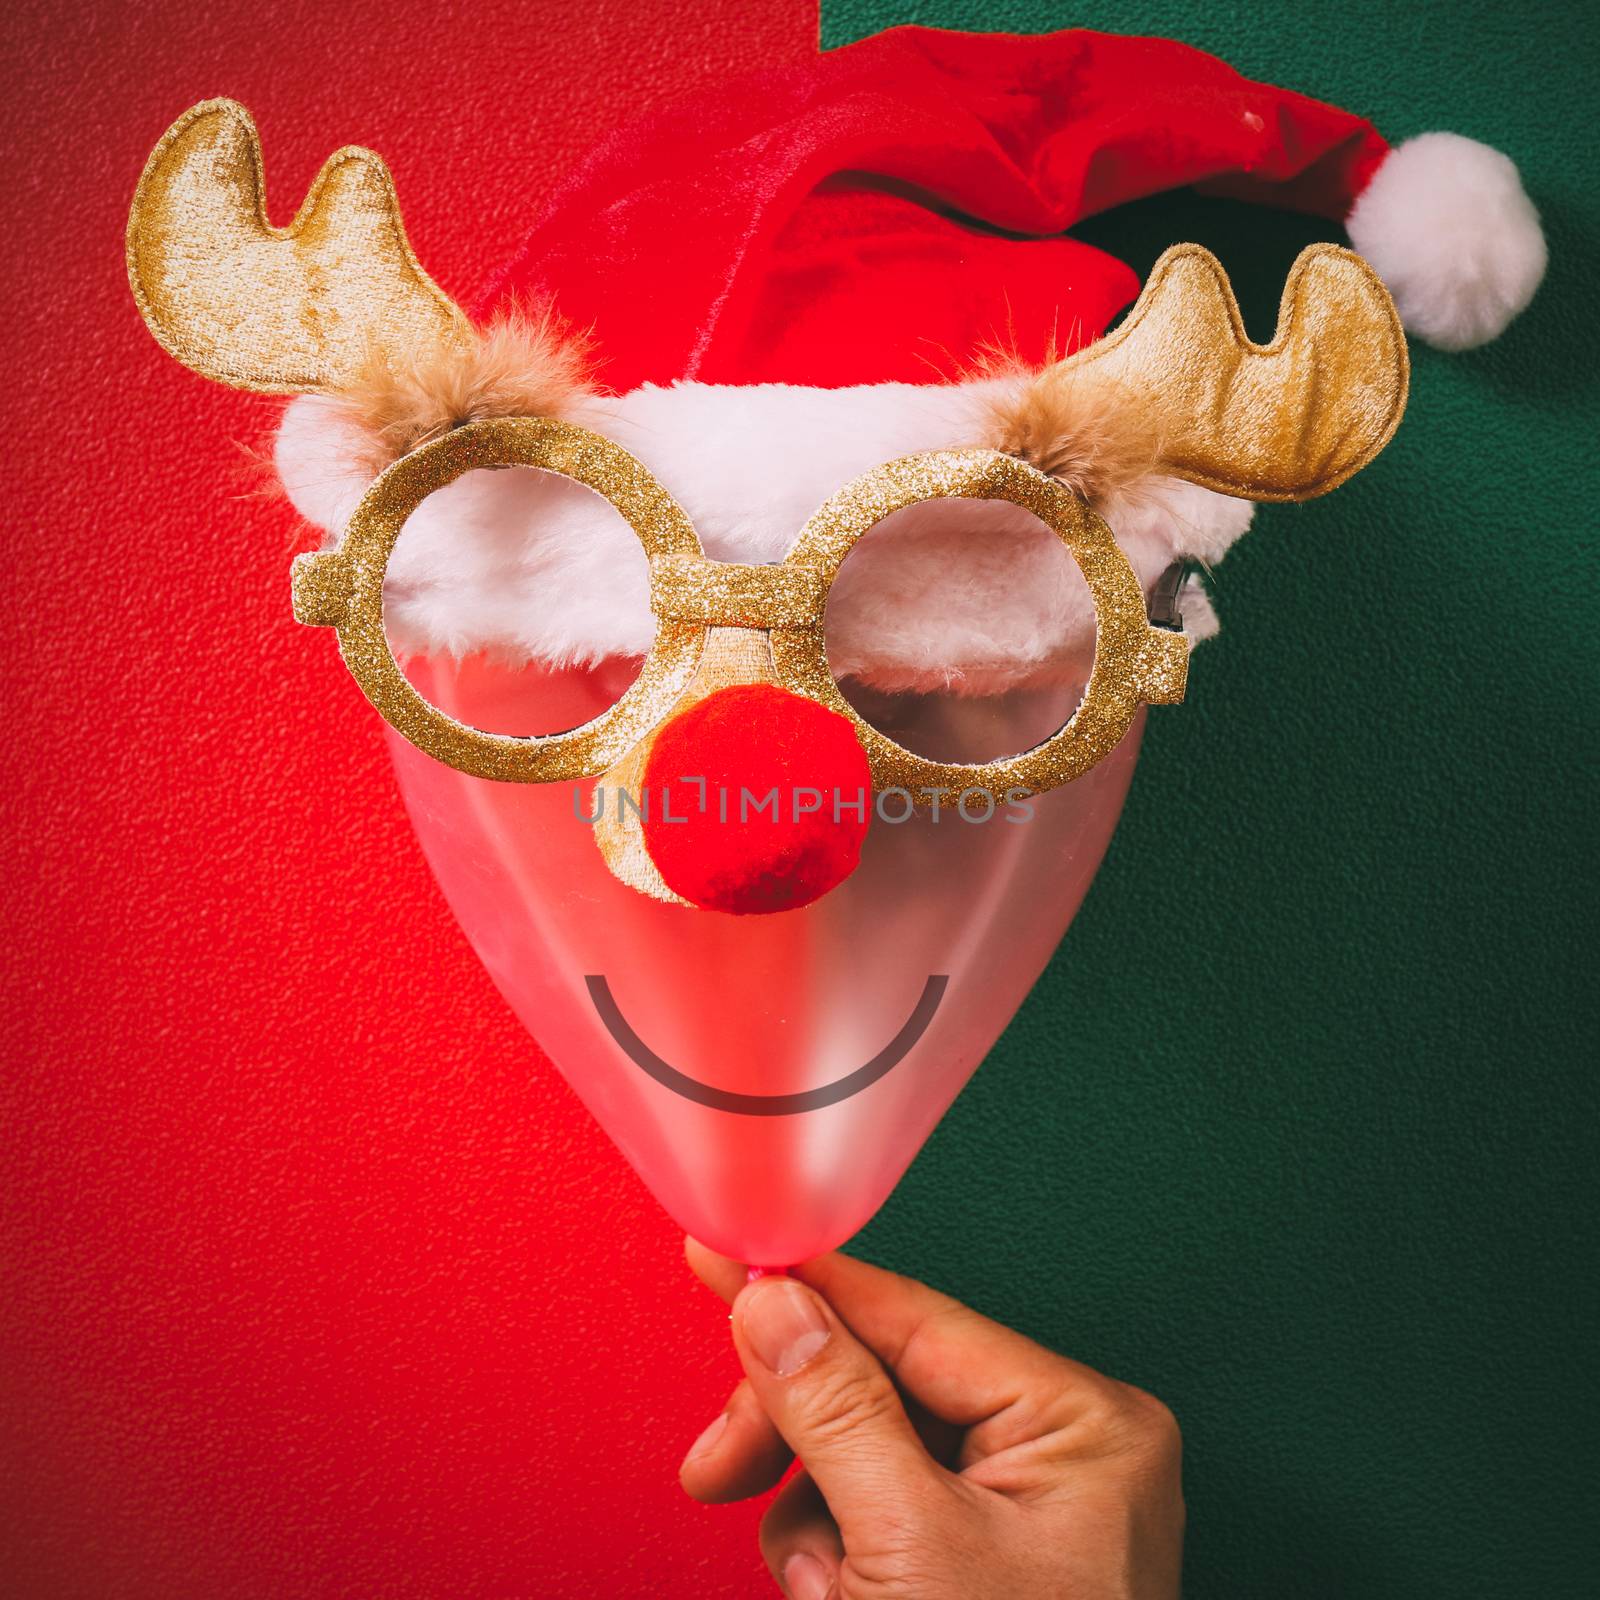 Hand holding Christmas glasses that decoration with reindeer and red hat on air bolloon on green and red background